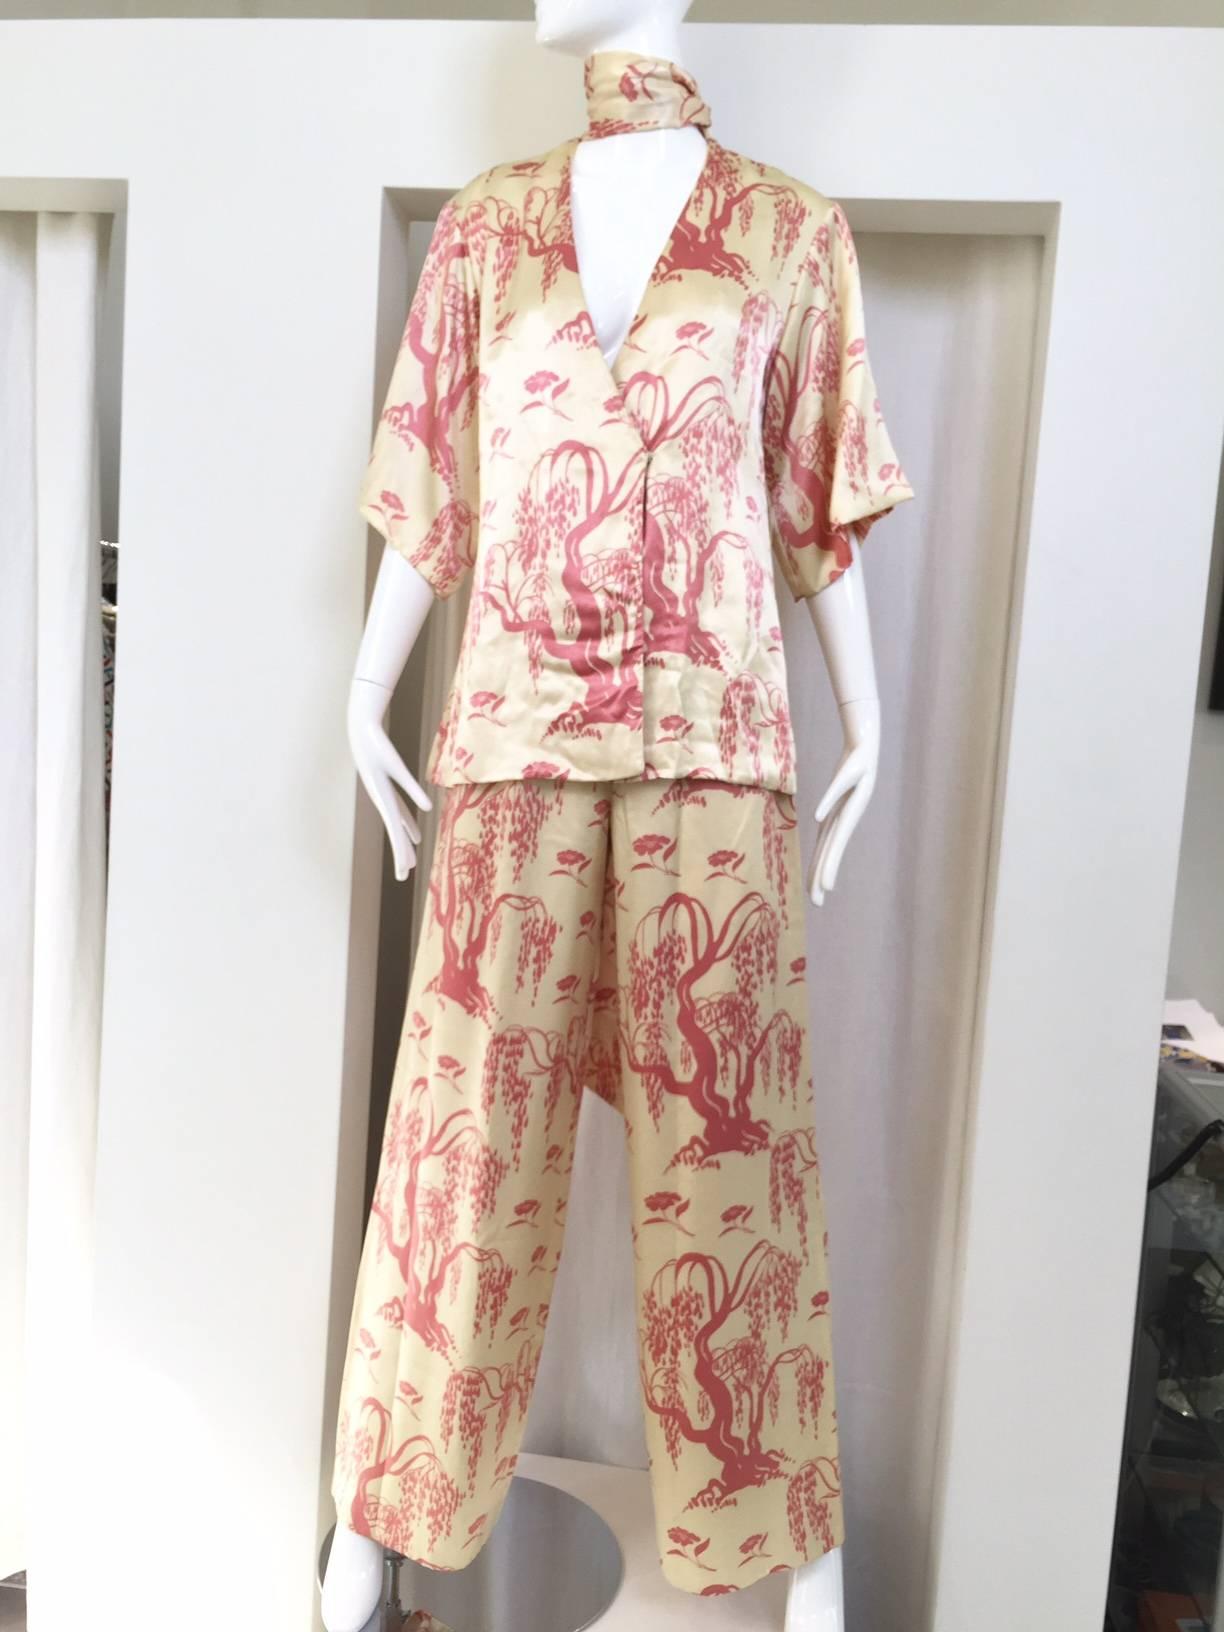 Chic and fun 70s Creme and pink salmon satin charmeuse kimono style top and pant set with sash.  Top fit size 4/6
Pant waist measurement: 26"